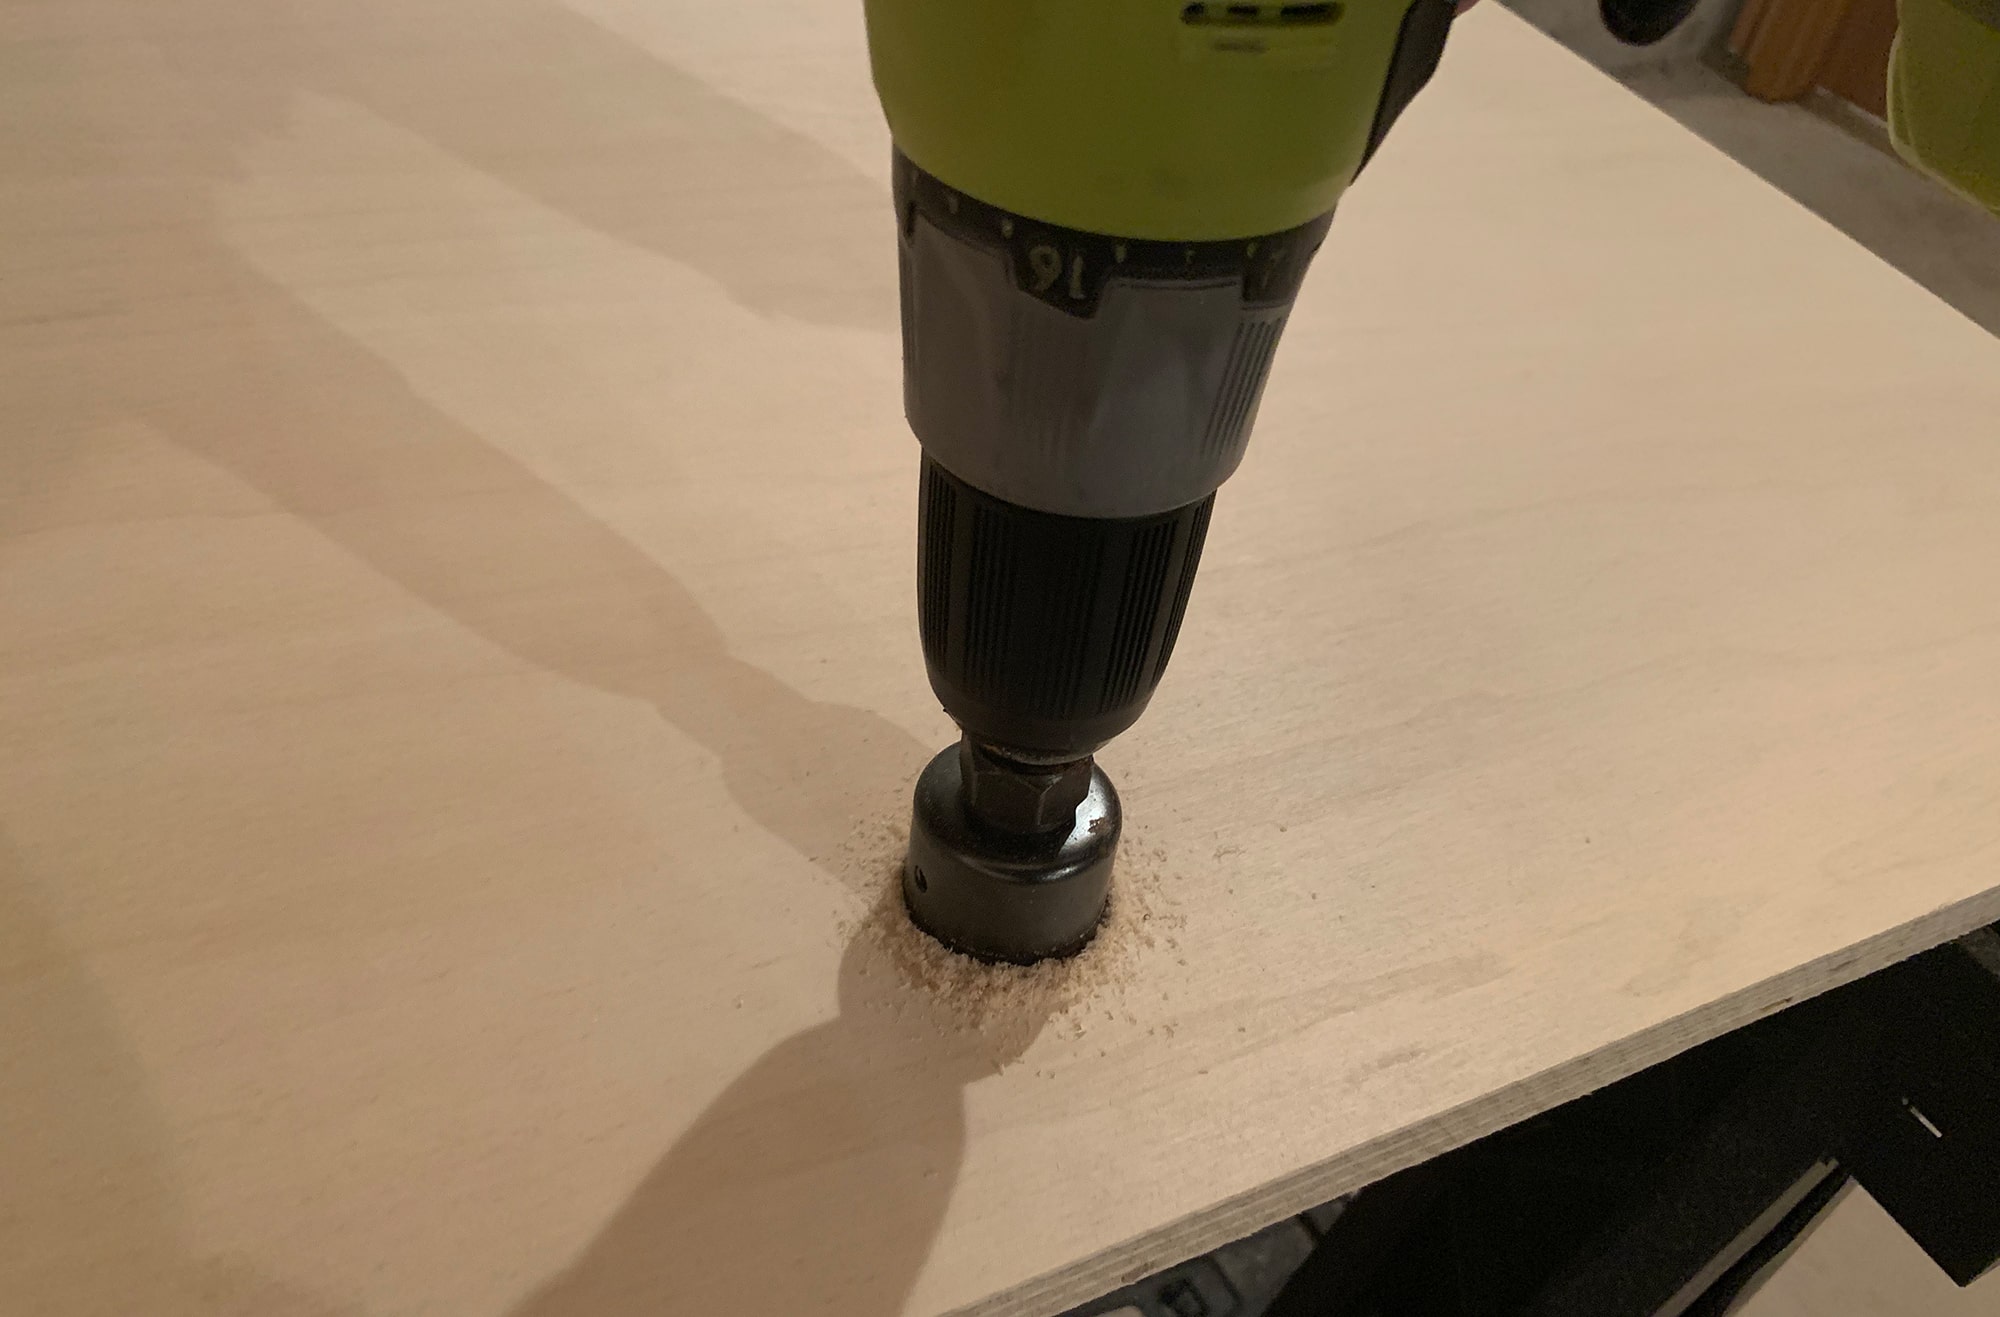 Cutting handle out with hole saw